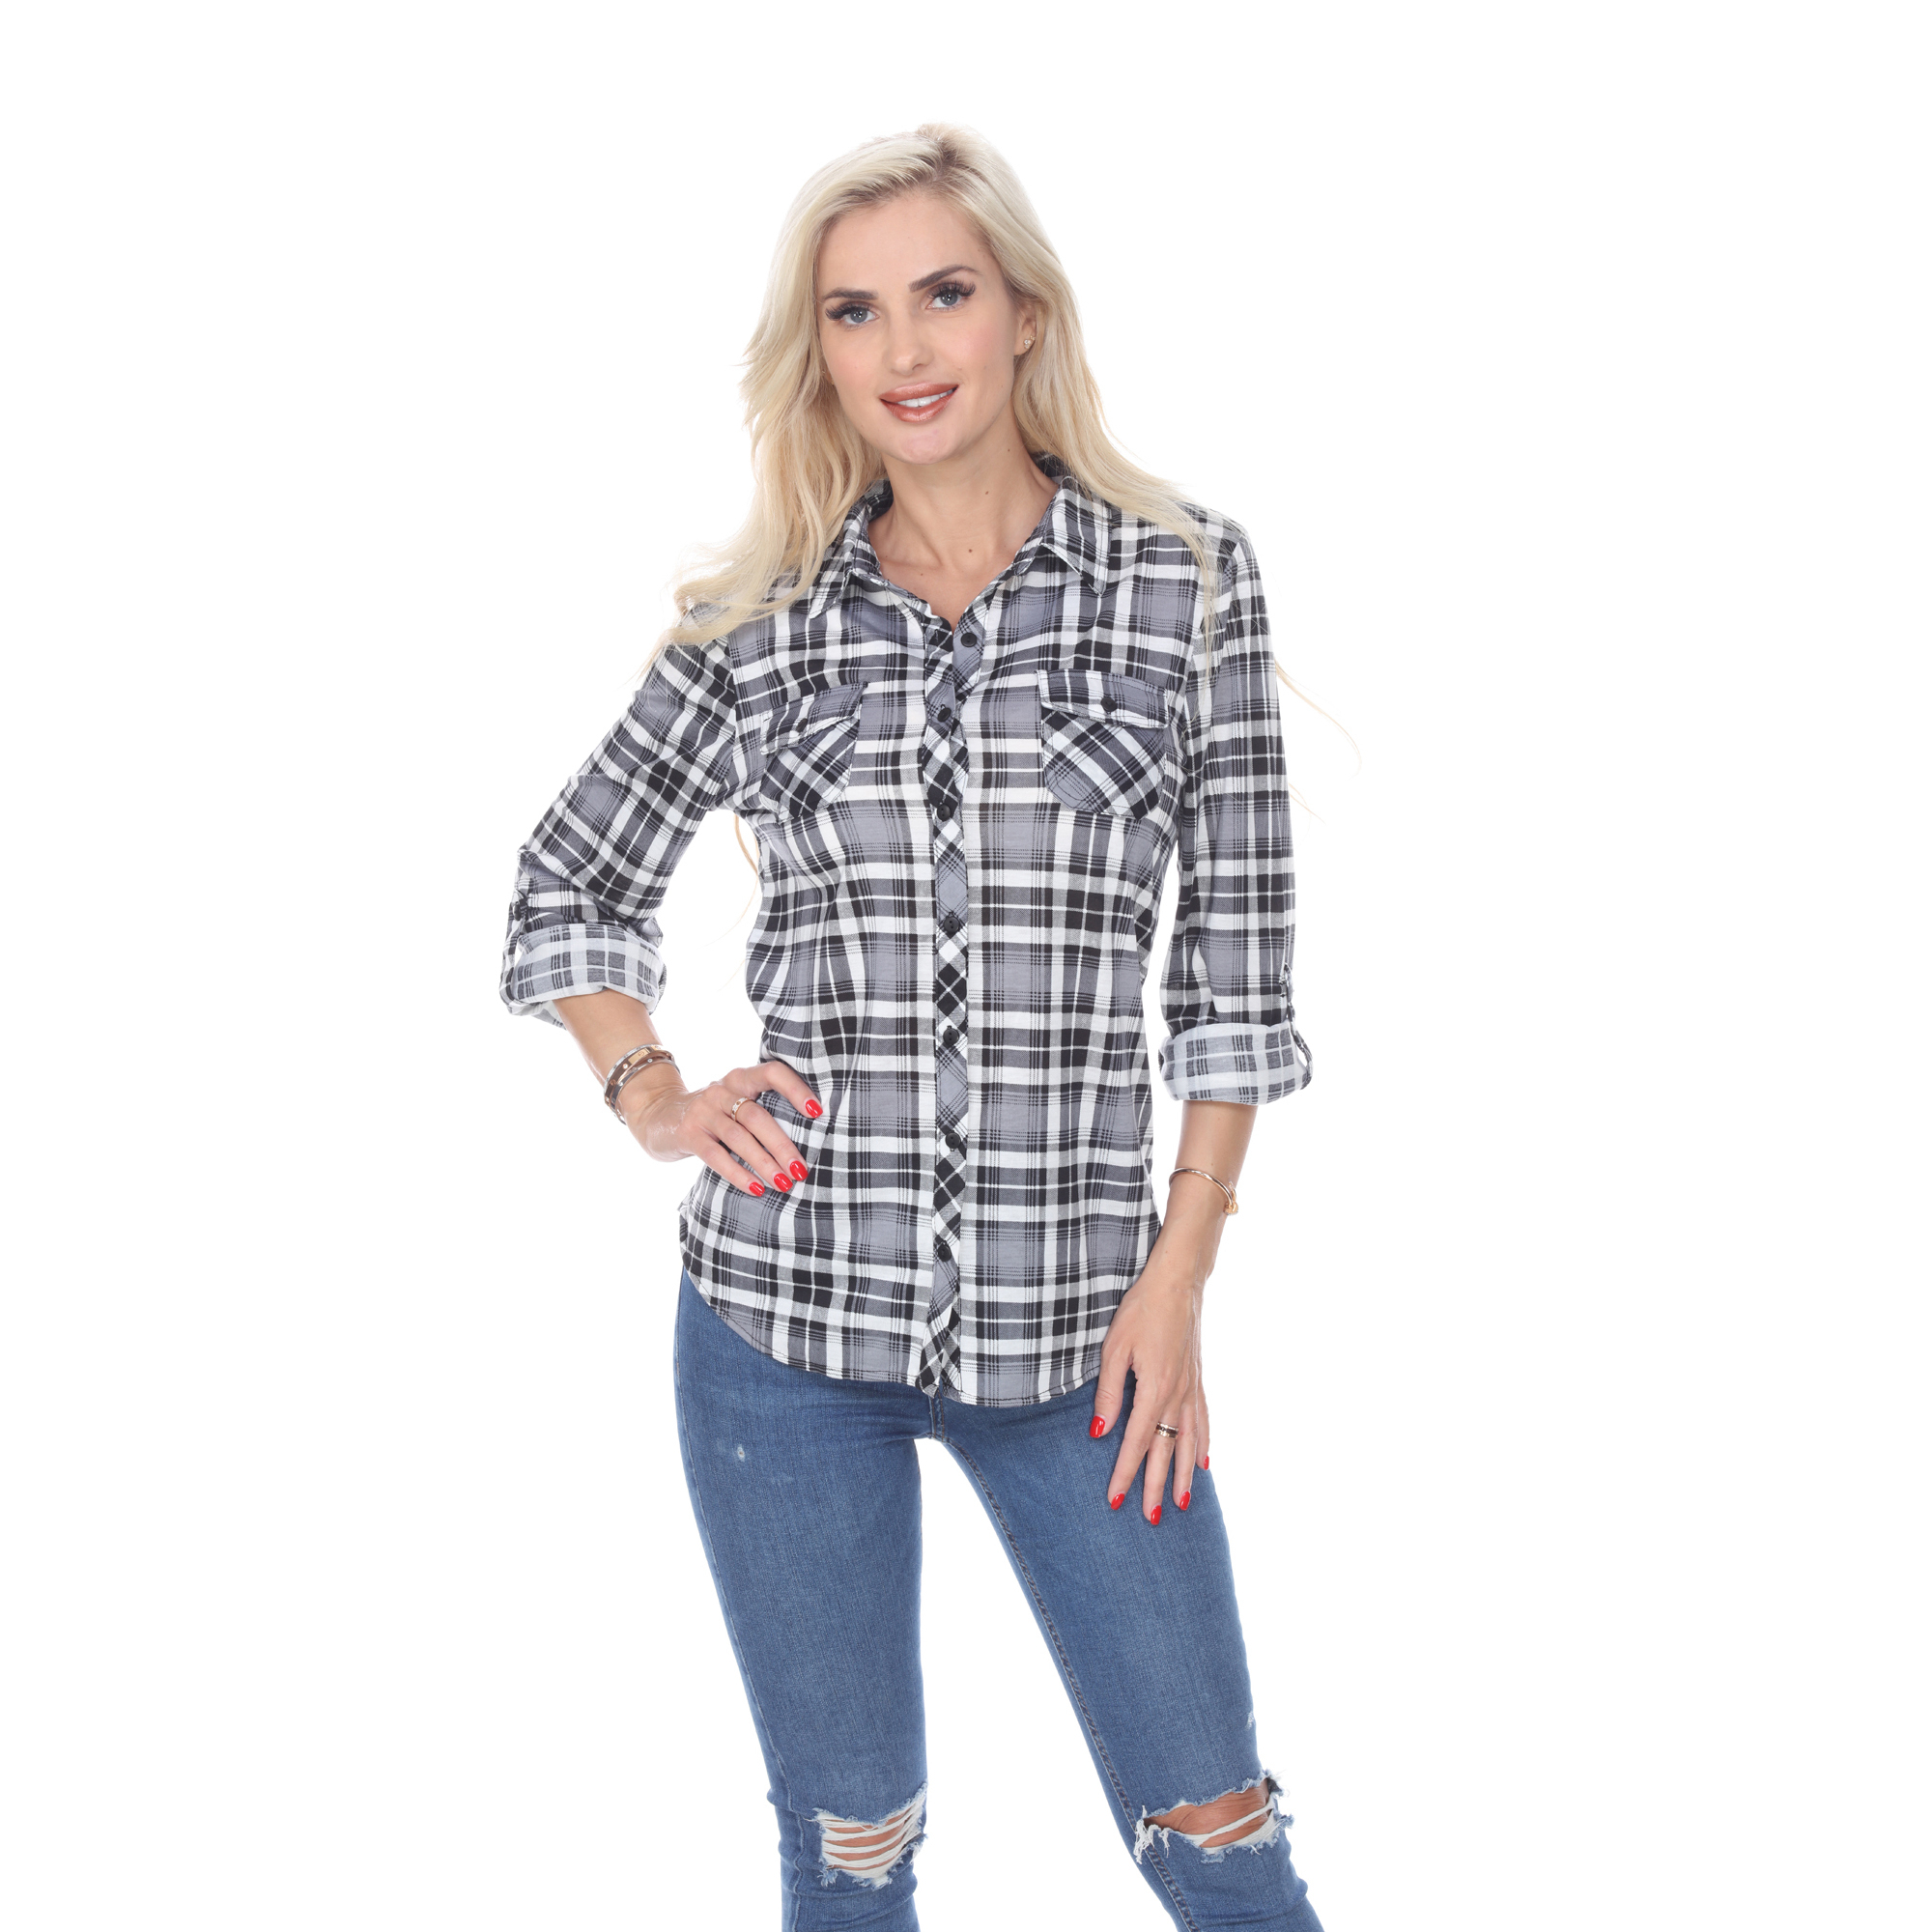 White Mark Women's Stretchy Plaid Flannel Shirt - Red/White, Small